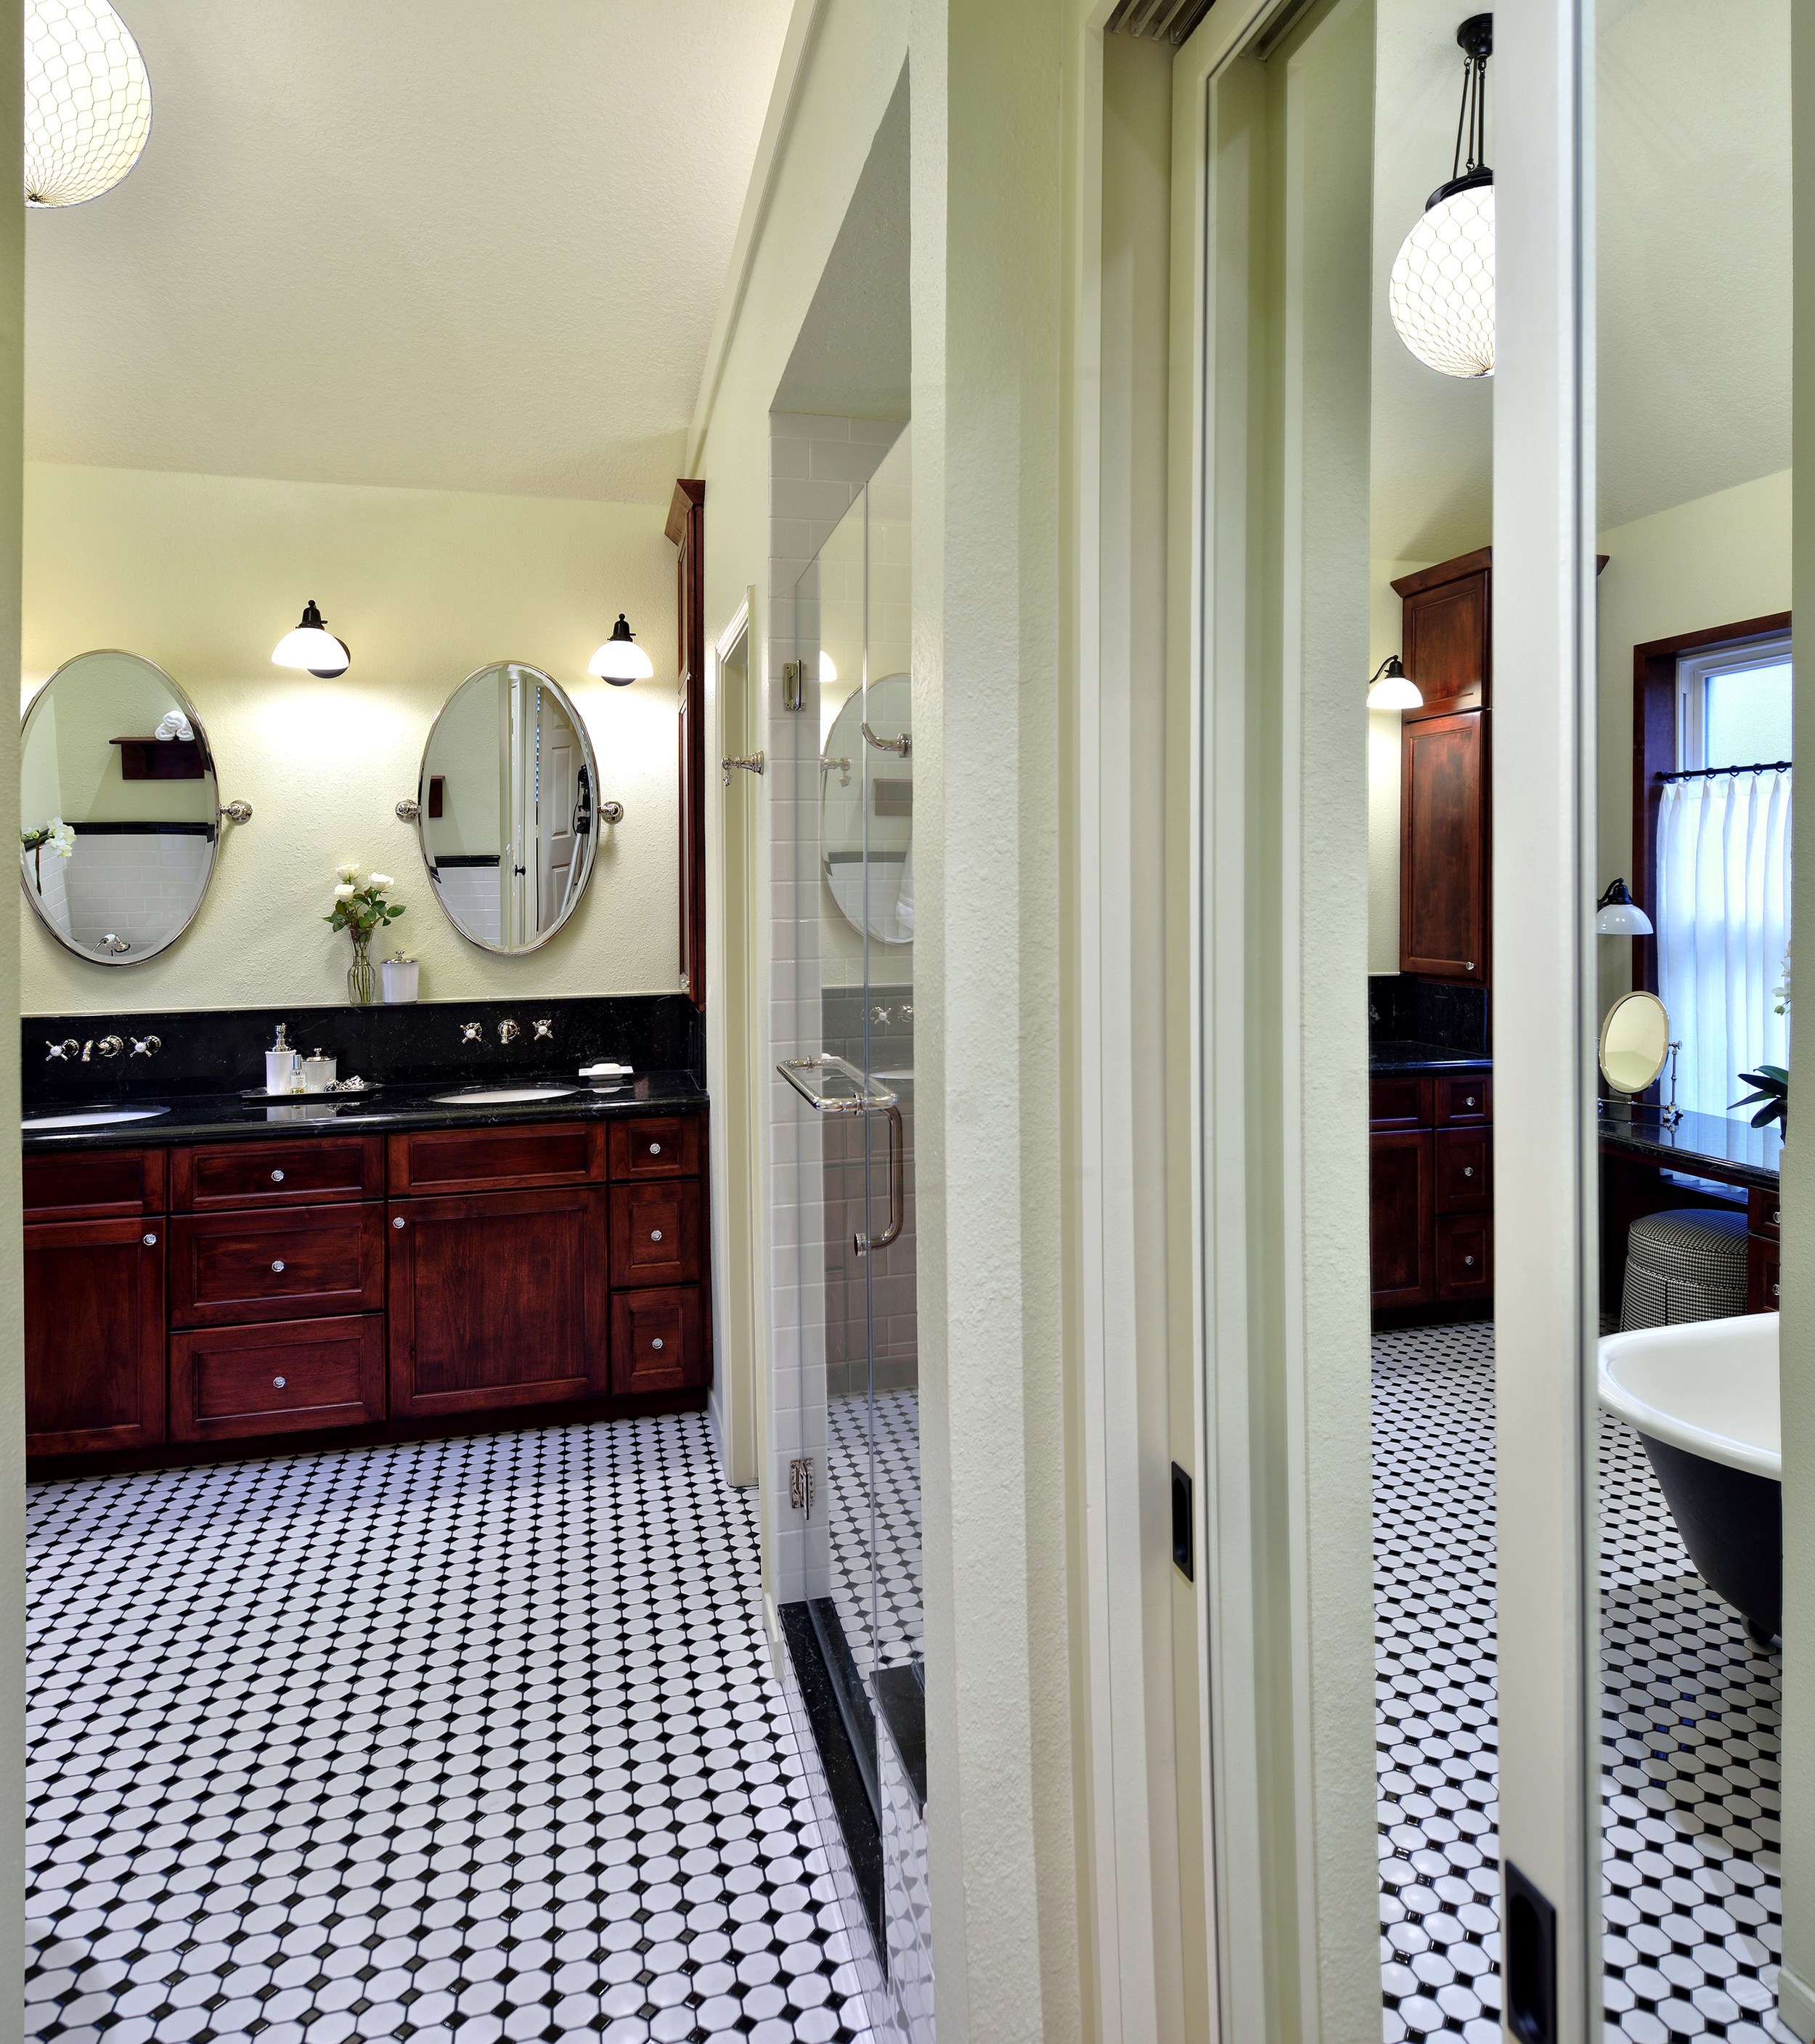 BEFORE & AFTER: This Vintage-Inspired Master Bathroom Is An Instant ...